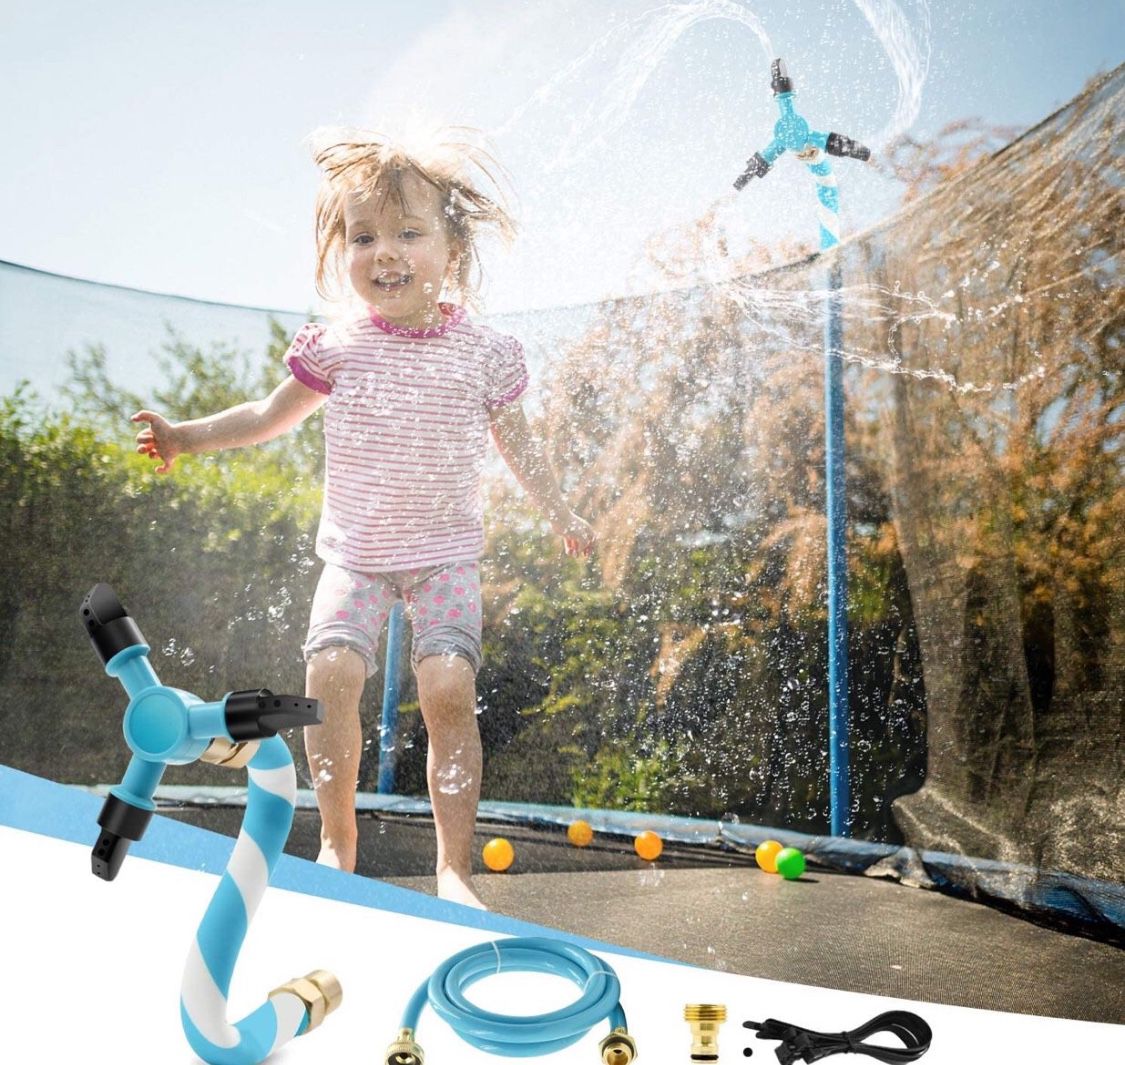 New! Trampoline Sprinkler for Kids, Outdoor Trampoline Accessories Fun Summer Cool Toys Water Game